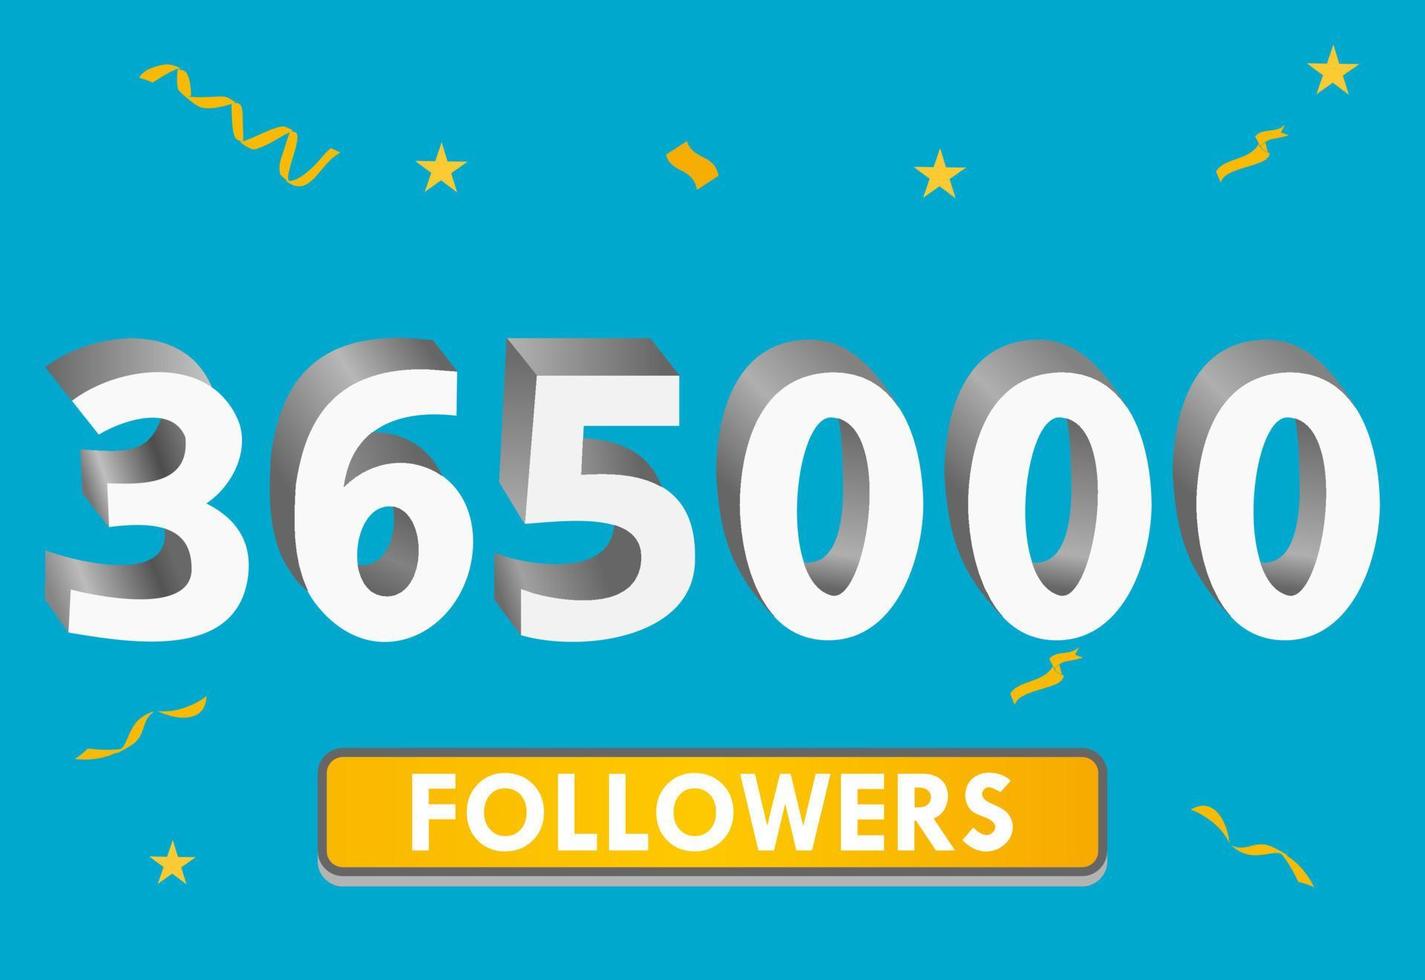 Illustration 3d numbers for social media 365k likes thanks, celebrating subscribers fans. Banner with 365000 followers vector